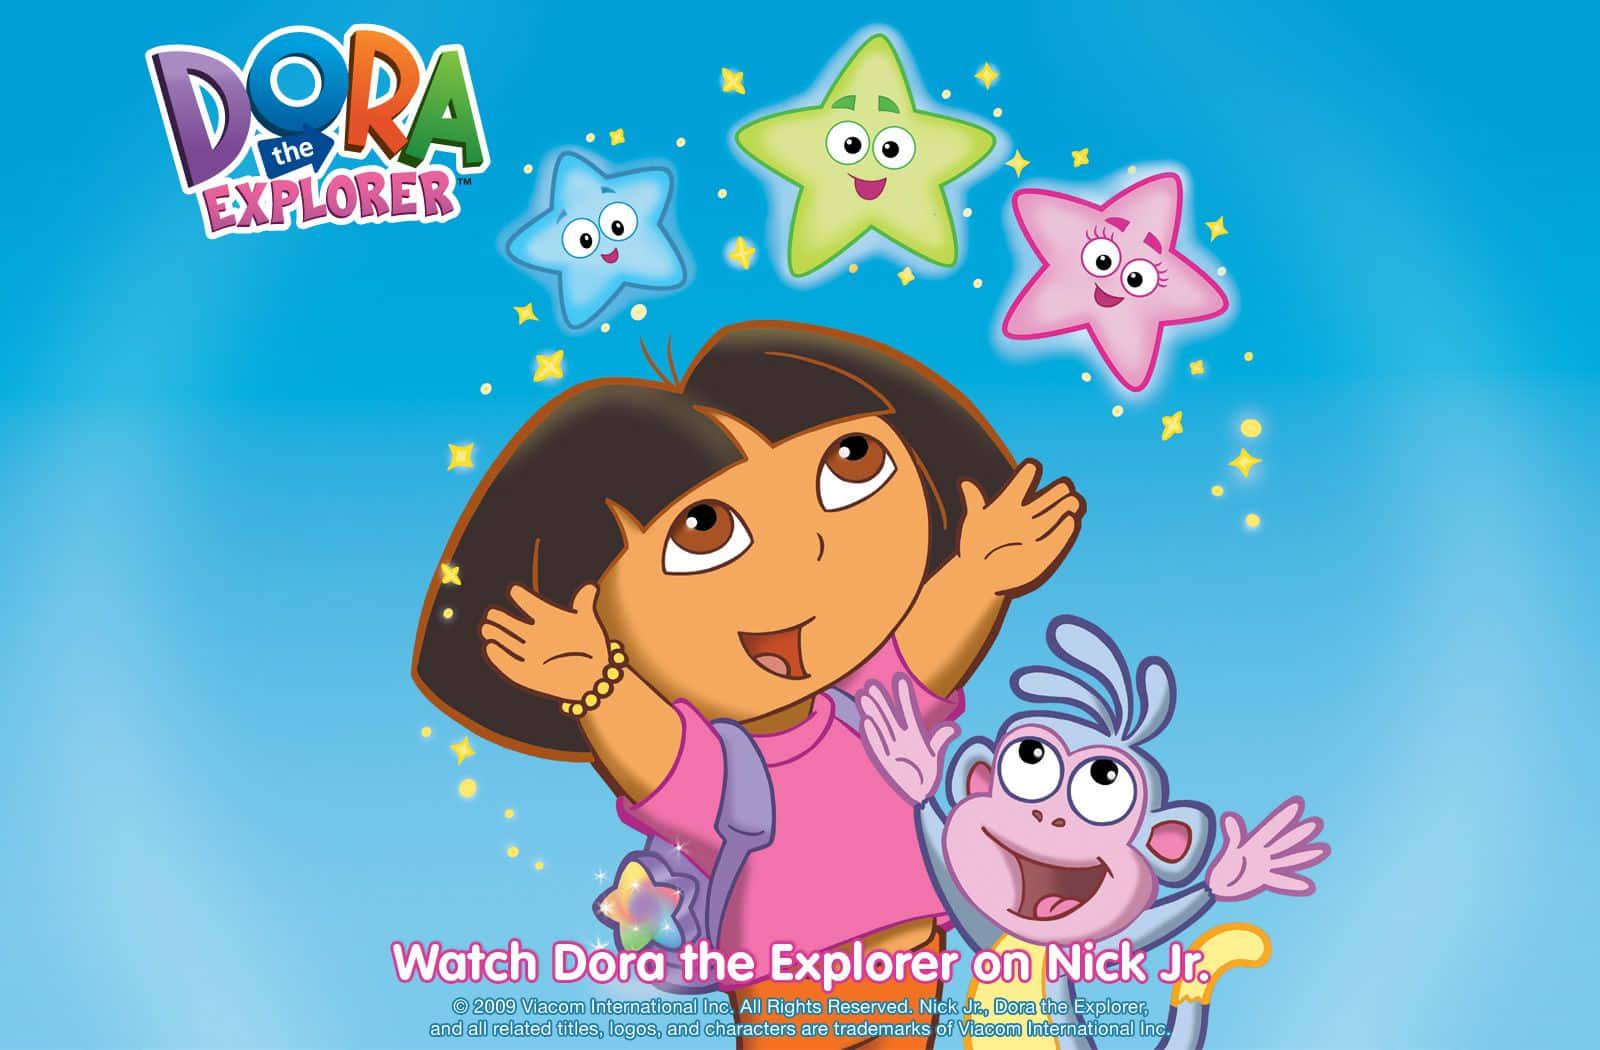 Dora, the brave explorer, is ready for her next adventure!